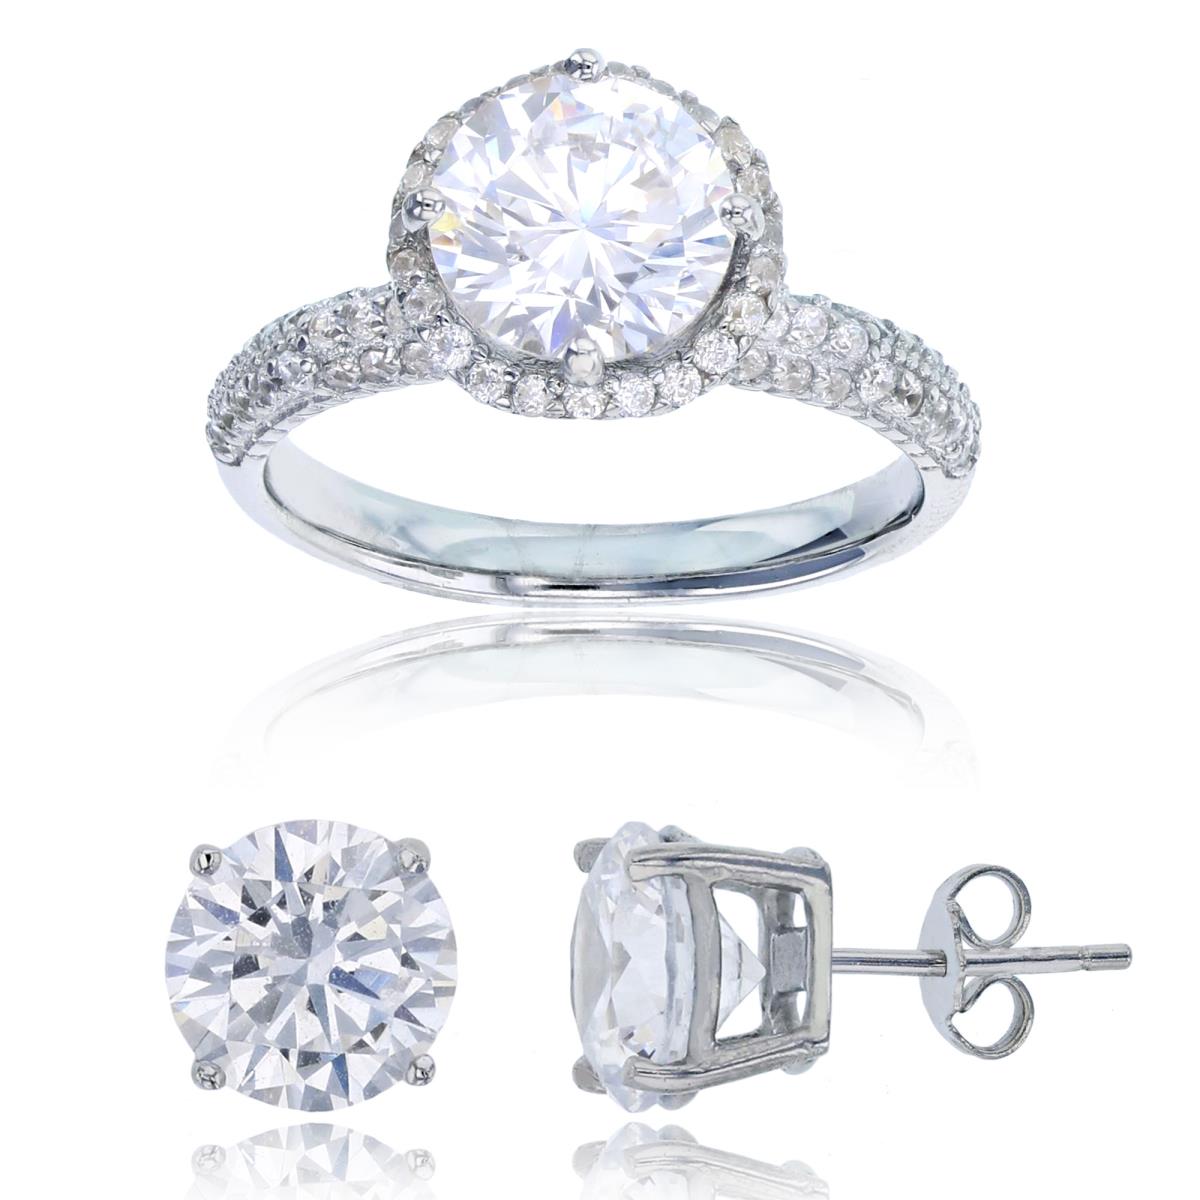 Sterling Silver Rhodium 8mm Rnd CZ Anniversary Halo Ring & 8mm Rd Solitaire Stud Earring Set